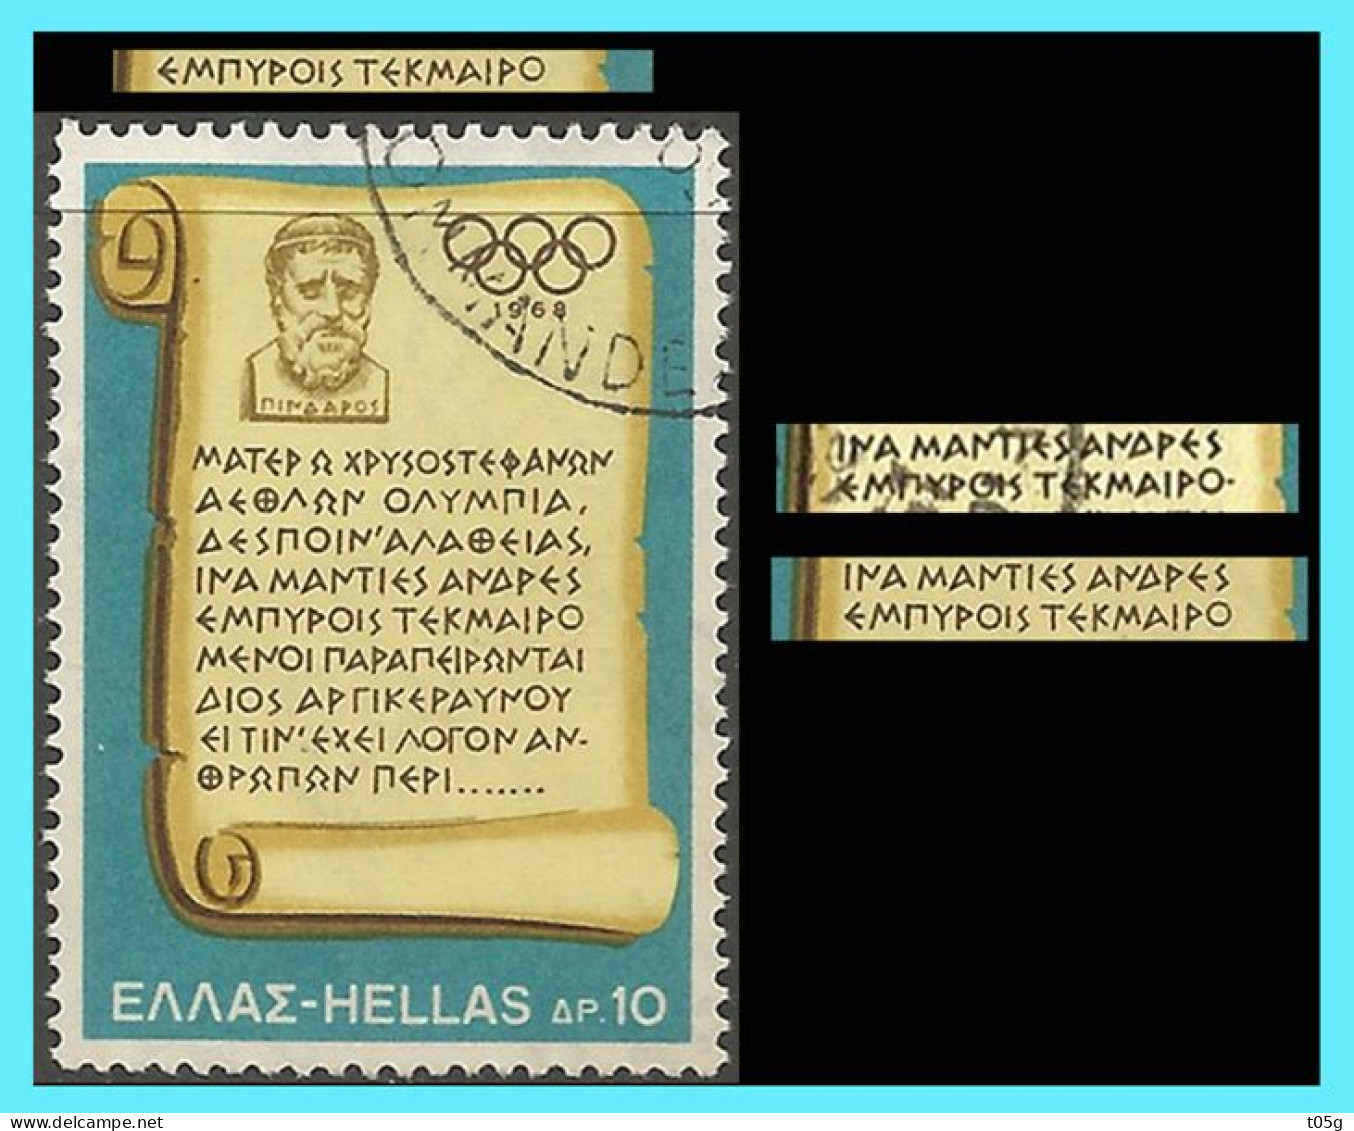 GREECE -GRECE- HELLAS 1968: Stamps (without --) TEKMAIPO Instead Of TEKMAIPO-- "Olympic Games Mexico" - Usati